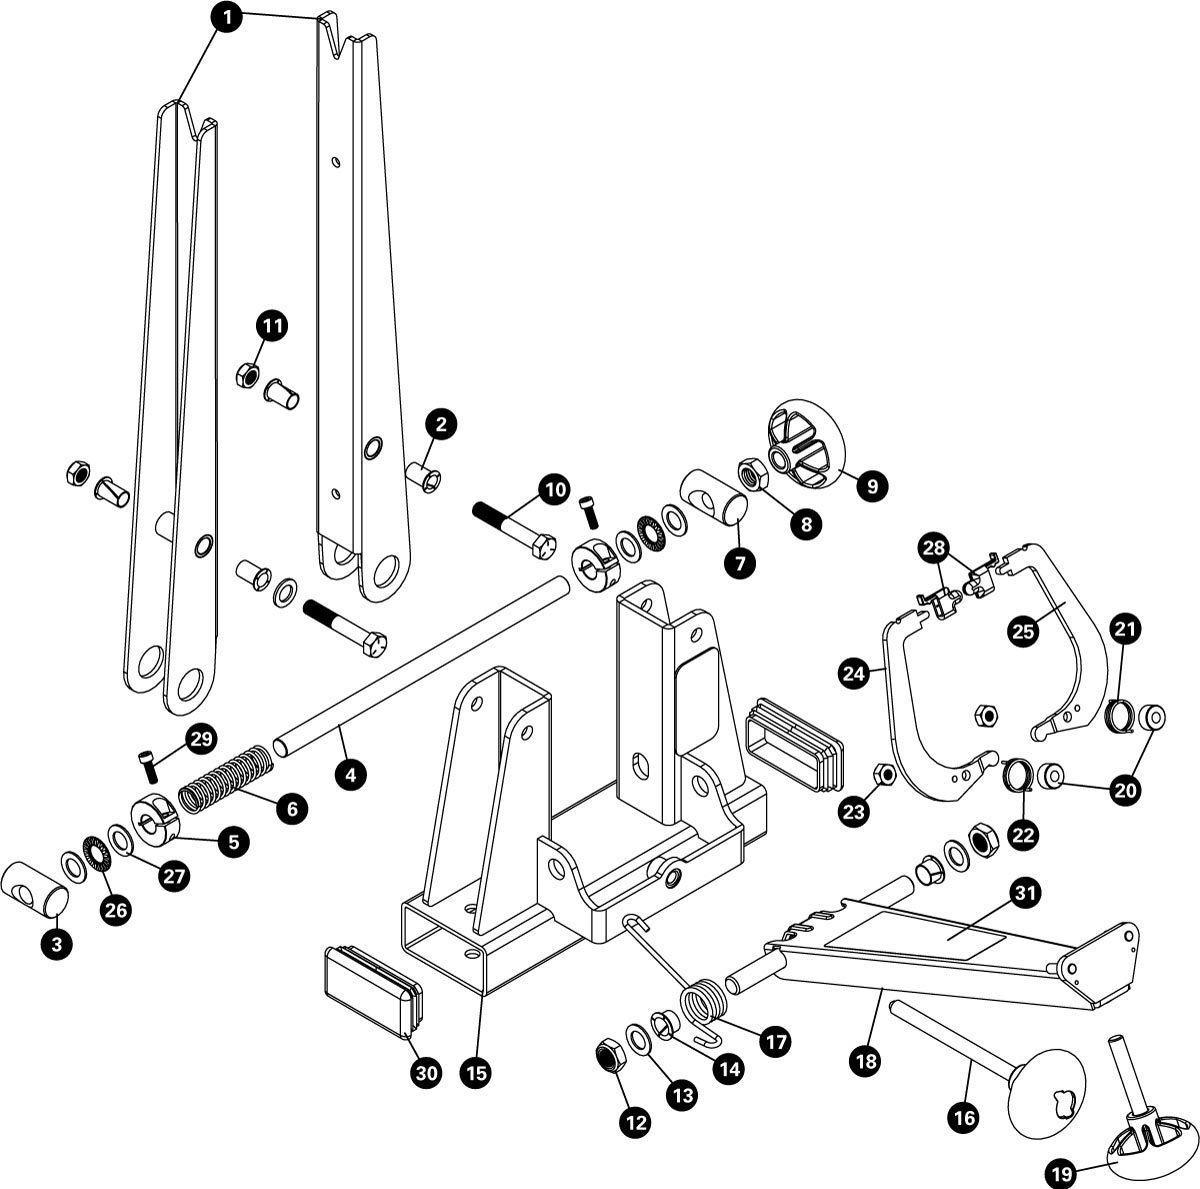 Parts diagram for TS-2.2 Professional Wheel Truing Stand, click to enlarge